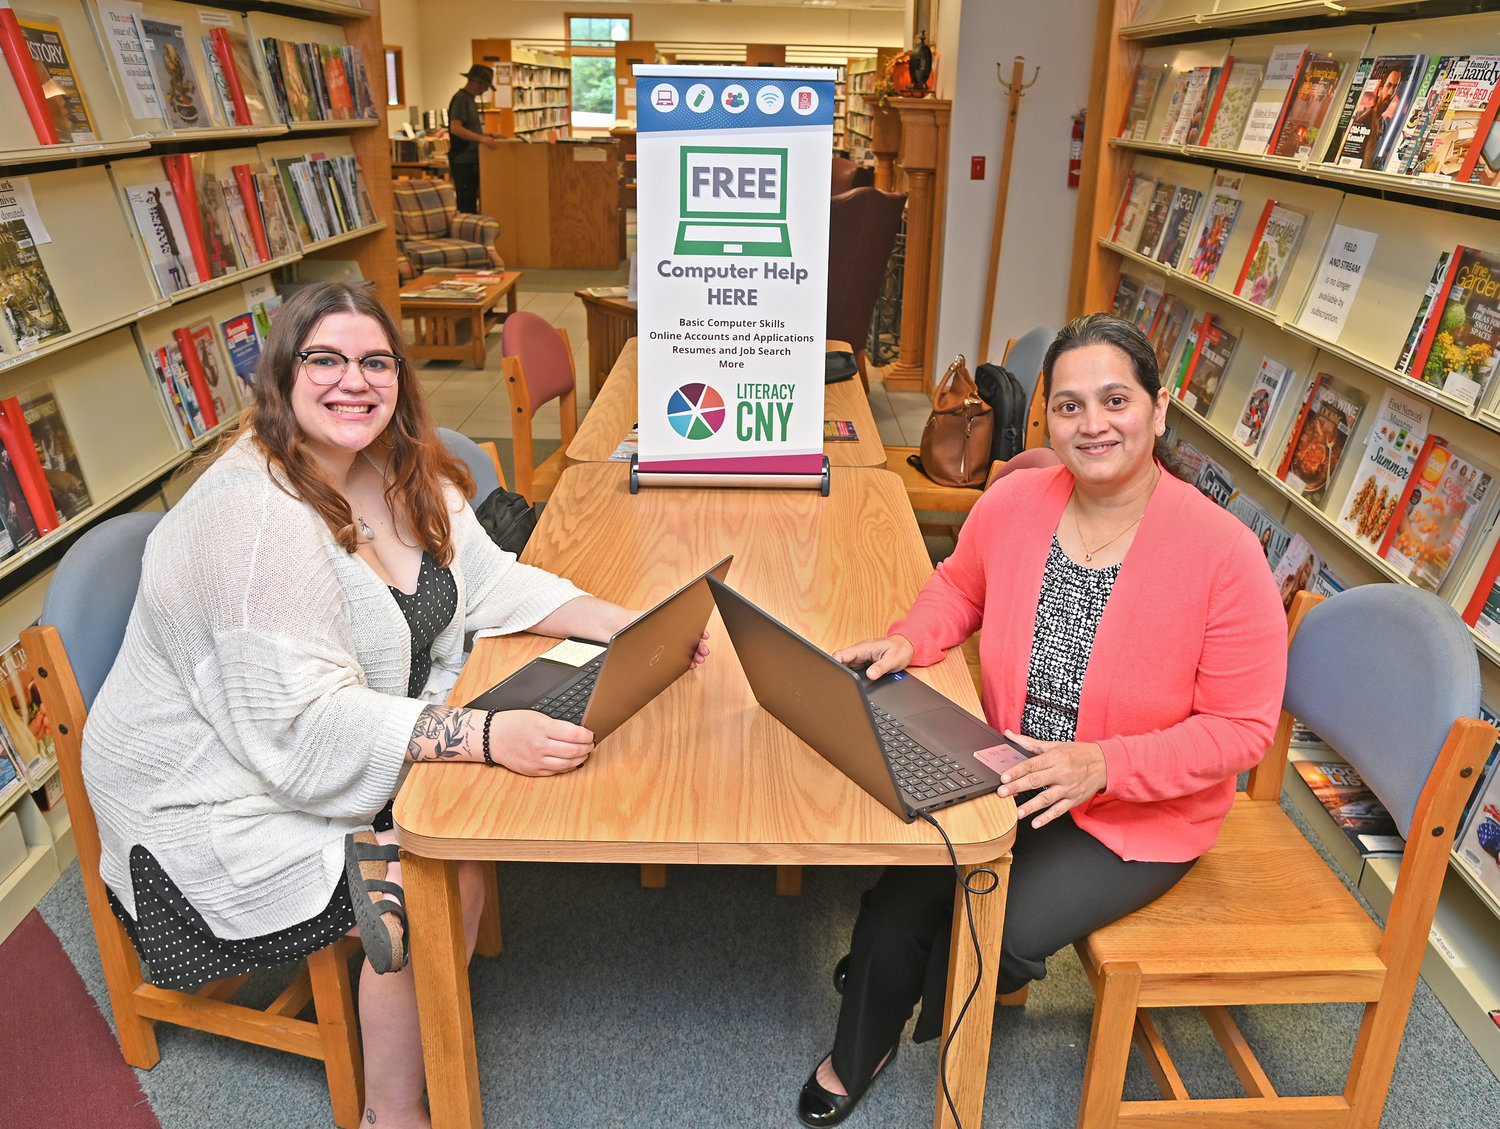 Lydia Torres, a digital literacy program coordinator with Literacy CNY, left, and Farhat Rahim, a Literacy CNY volunteer, pose Monday at the New Hartford Public Library. The library offers computer help from 11 a.m. to 2 p.m. and 5-8 p.m. Mondays thanks to Literacy CNY.